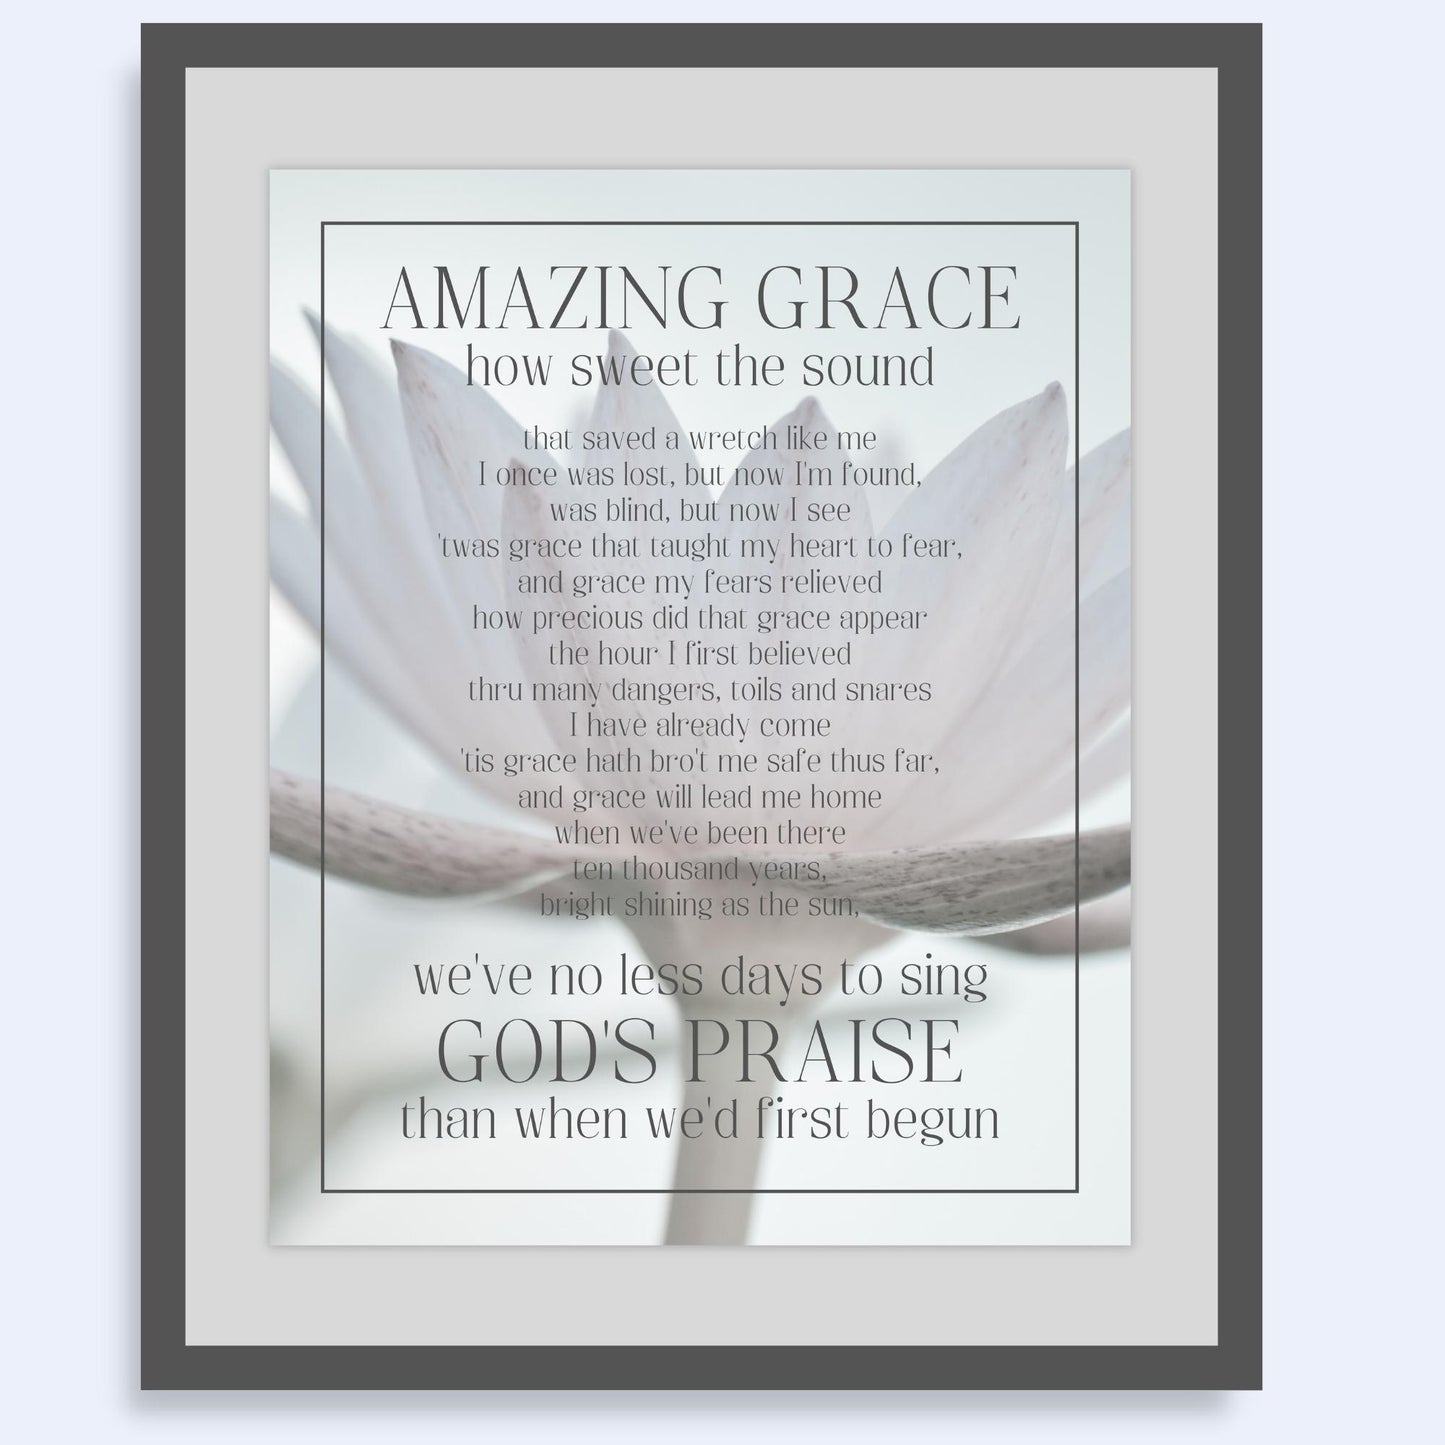 Inspirational Song Lyric Wall Art - AMAZING GRACE how sweet the sound... Christian Wall Poster (16x20) | shown in dark wood picture frame | oak7west.com